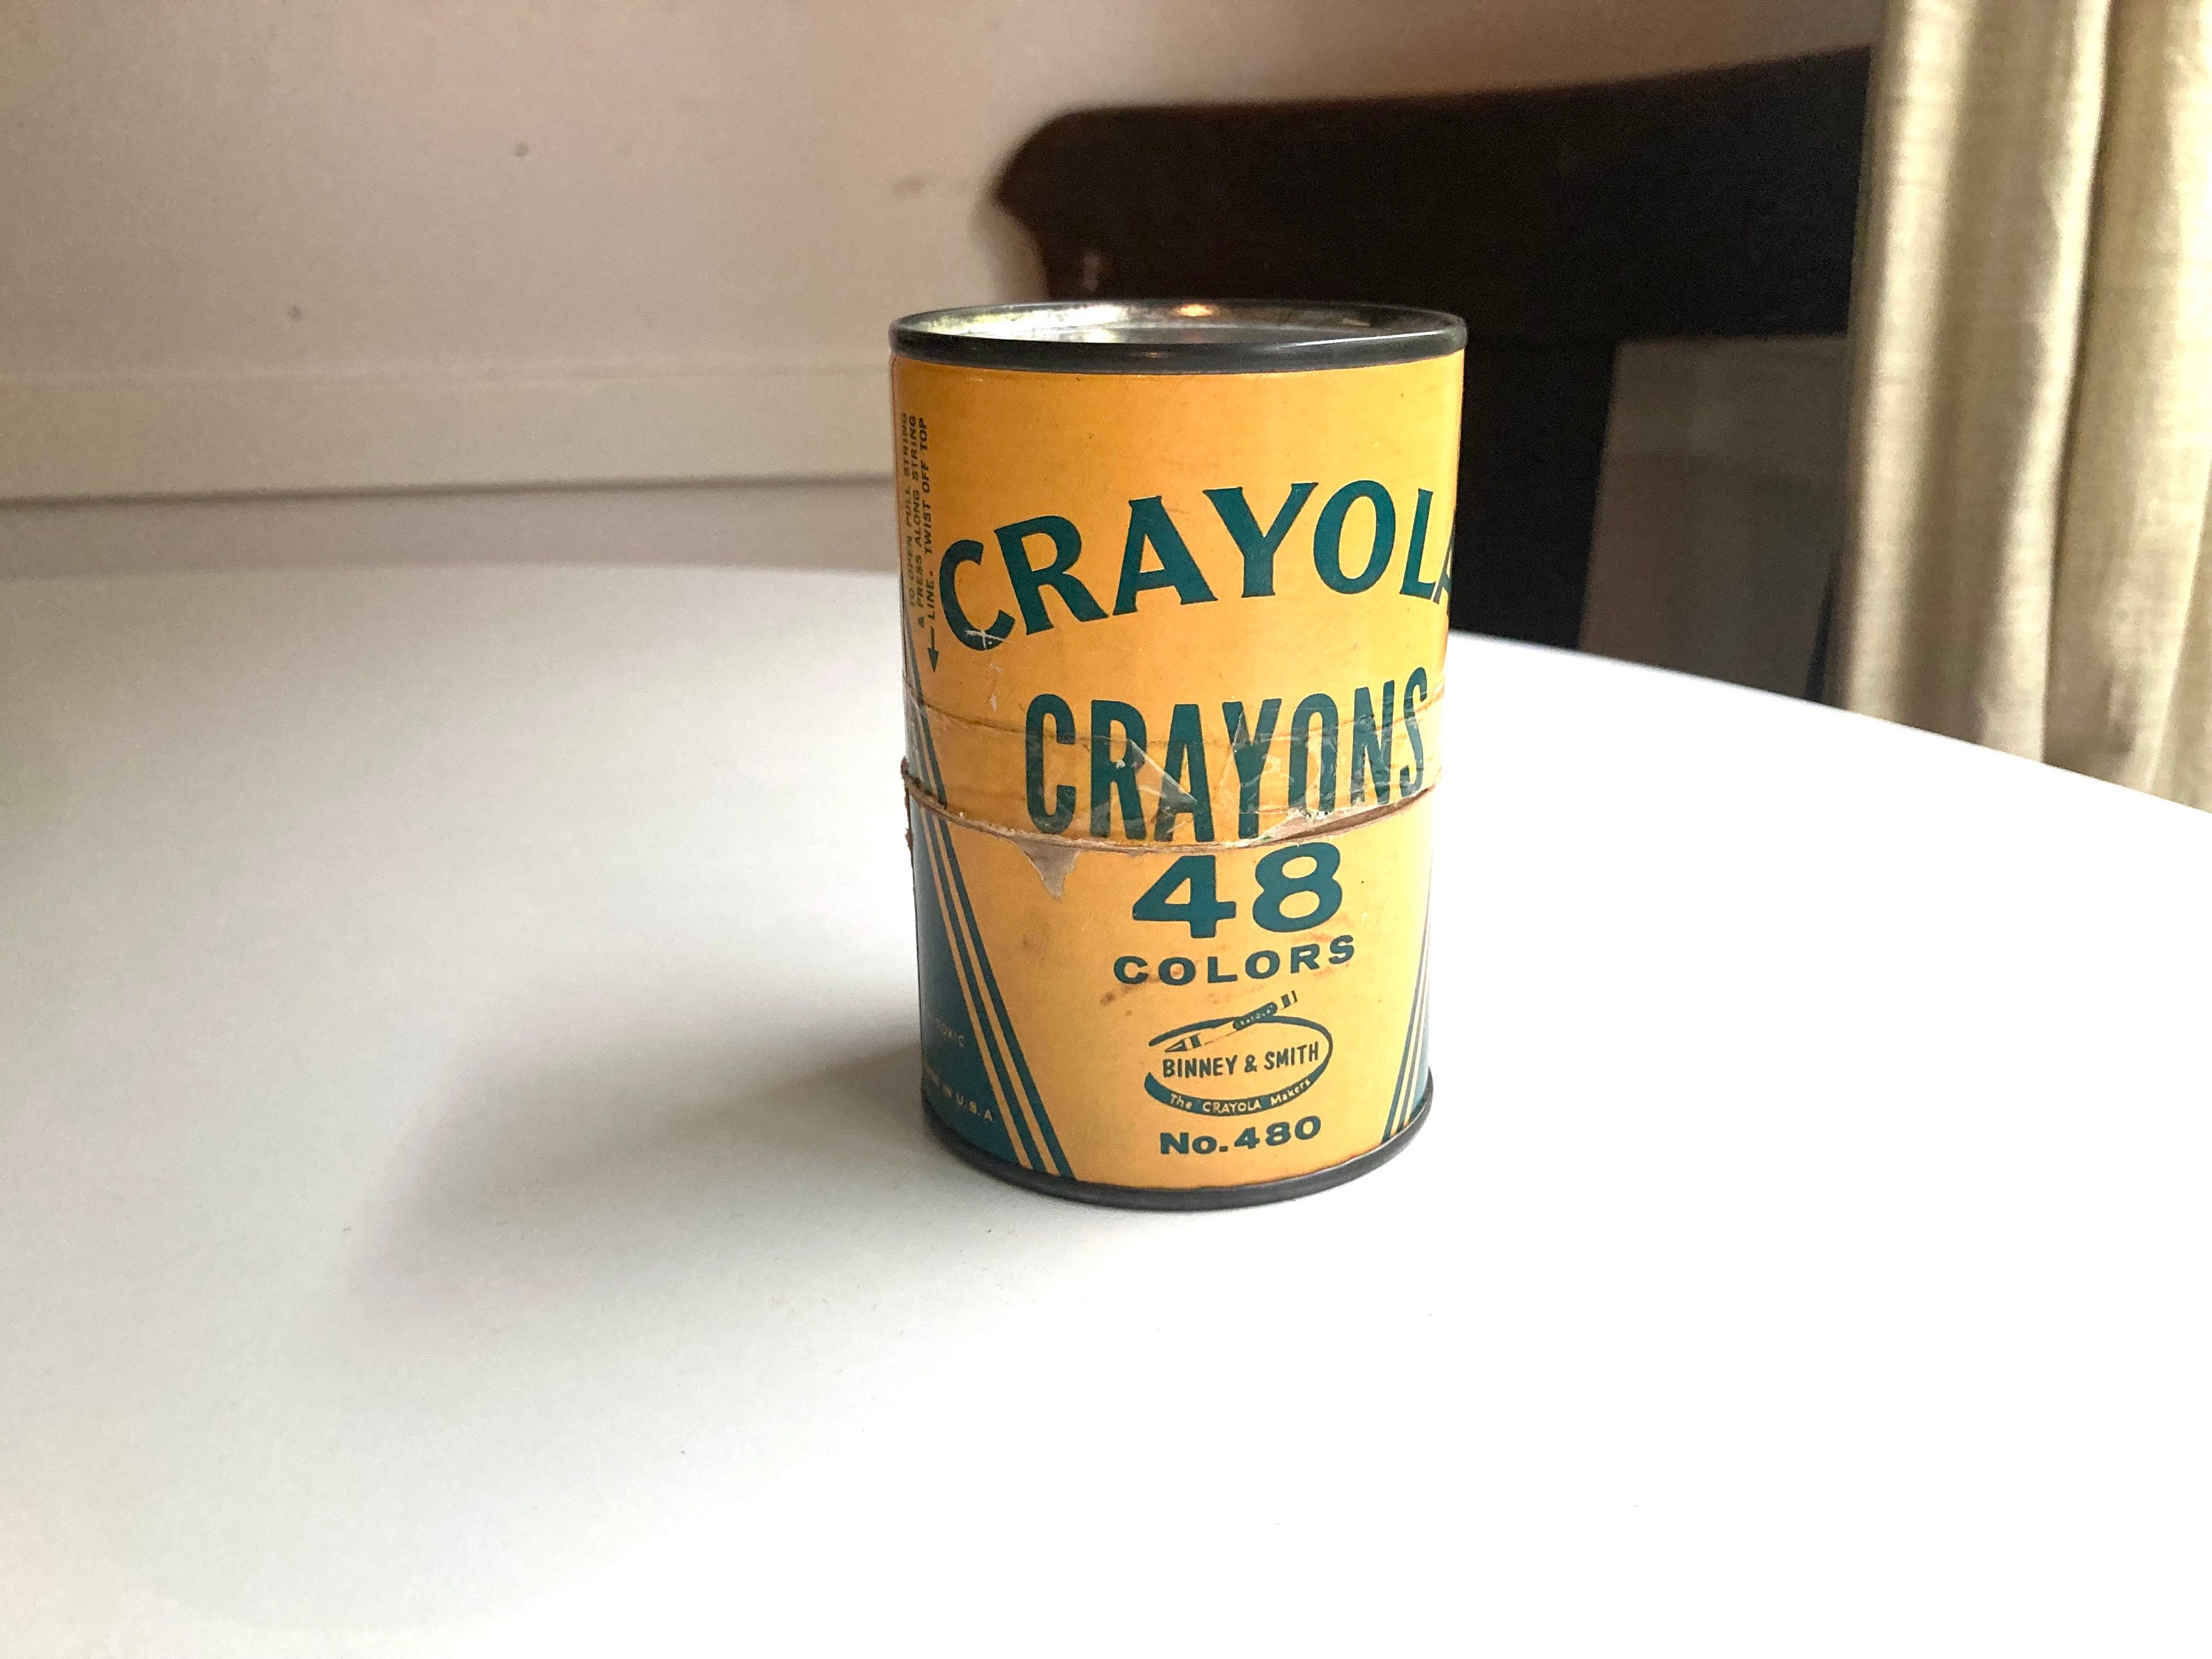 Lot of 5 Vintage Crayola Crayons and Boxes Made in USA – Shop Thrift World